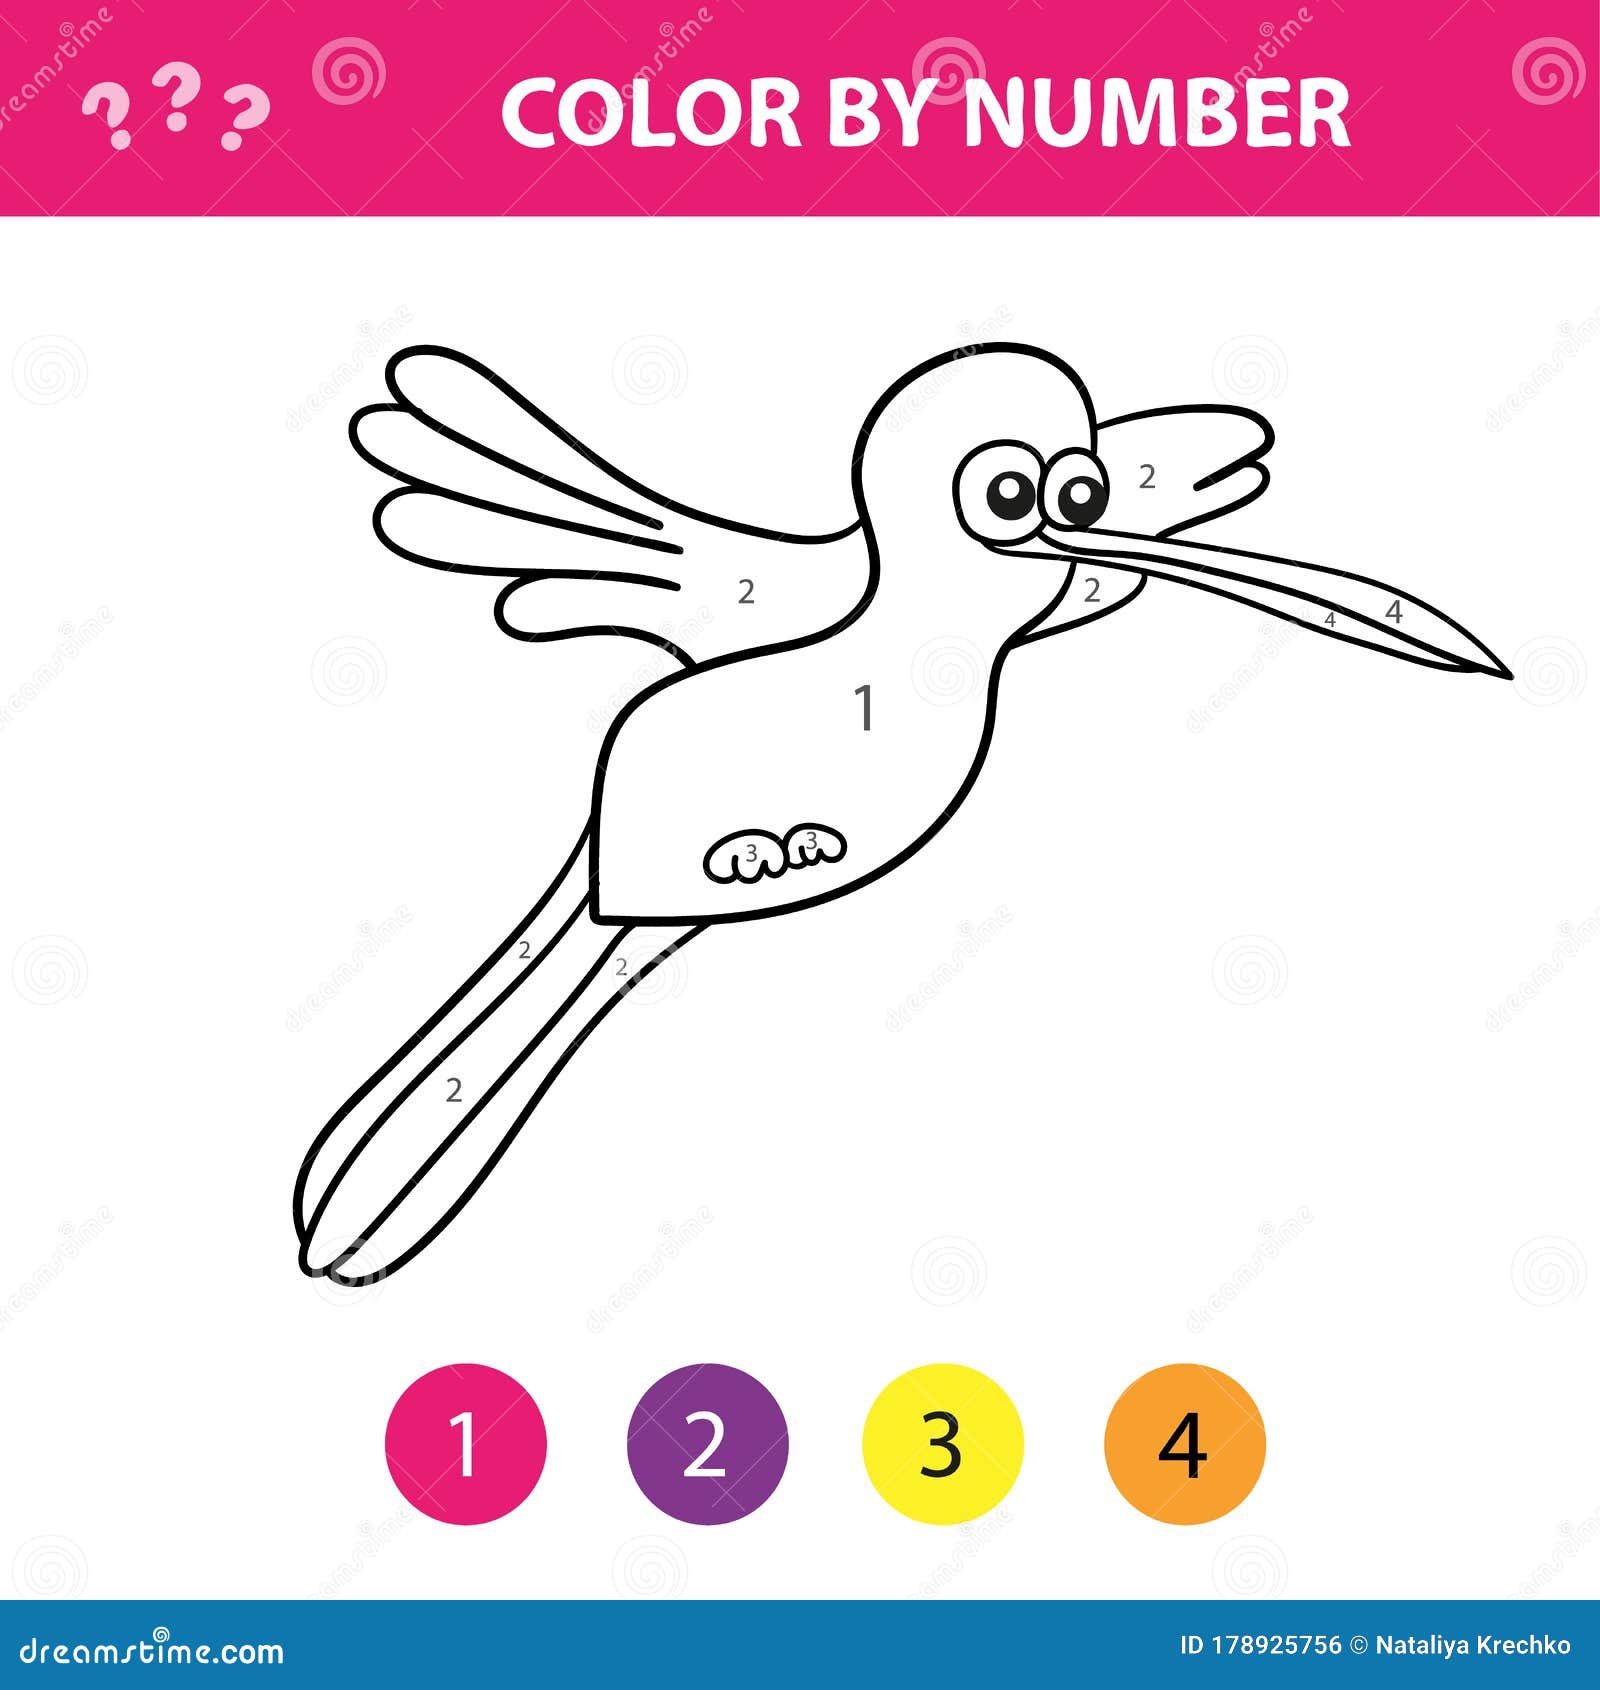 Download Educational Children Game Color The Picture By Number Coloring Book With Bird Stock Vector Illustration Of Contour Learning 178925756